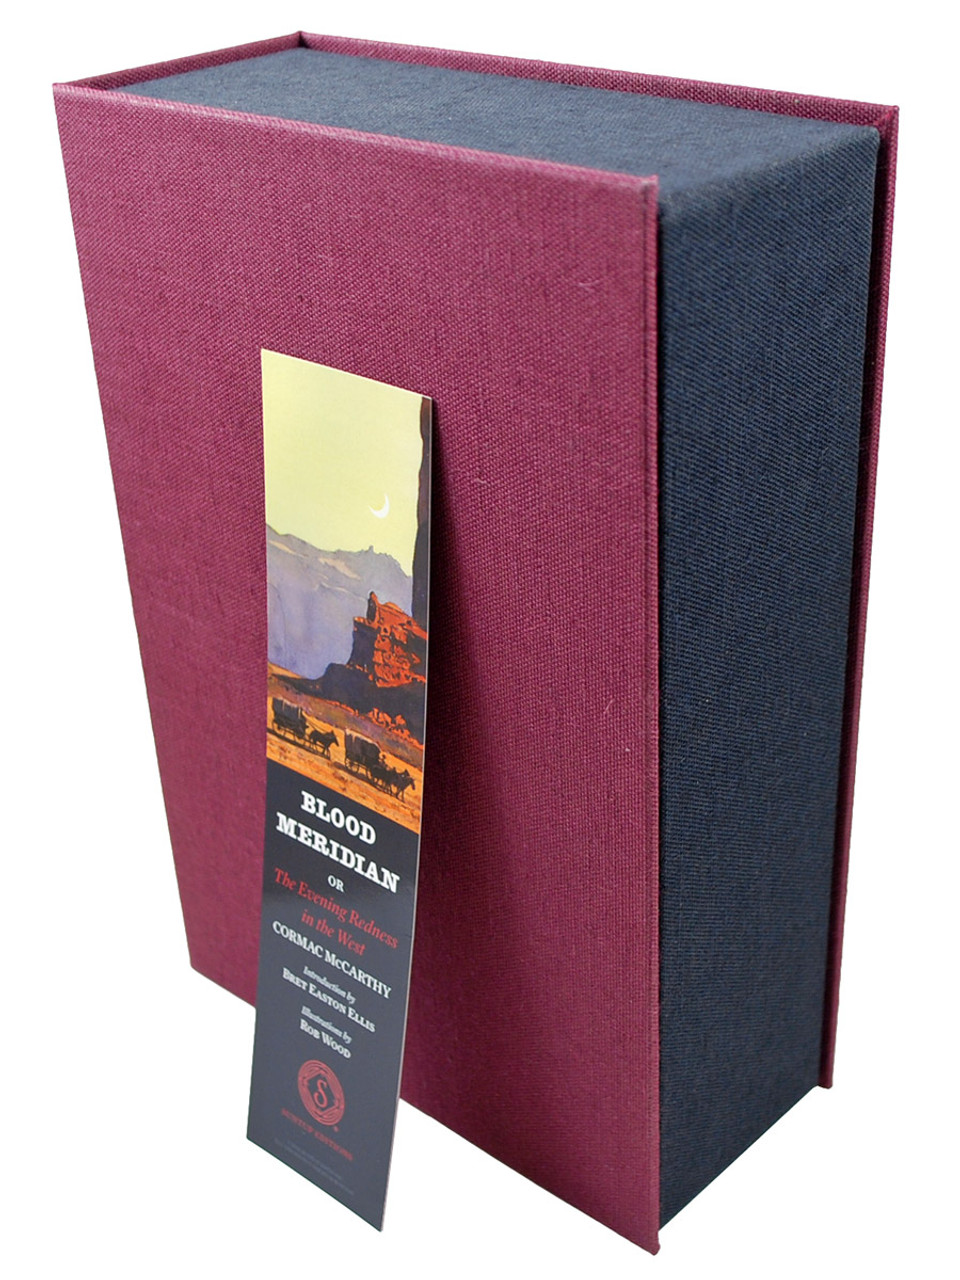 Cormac McCarthy "Blood Meridian" Signed Limited Numbered Edition,  Leather Bound, No. 71 of 350 Tray-cased [Very Fine]